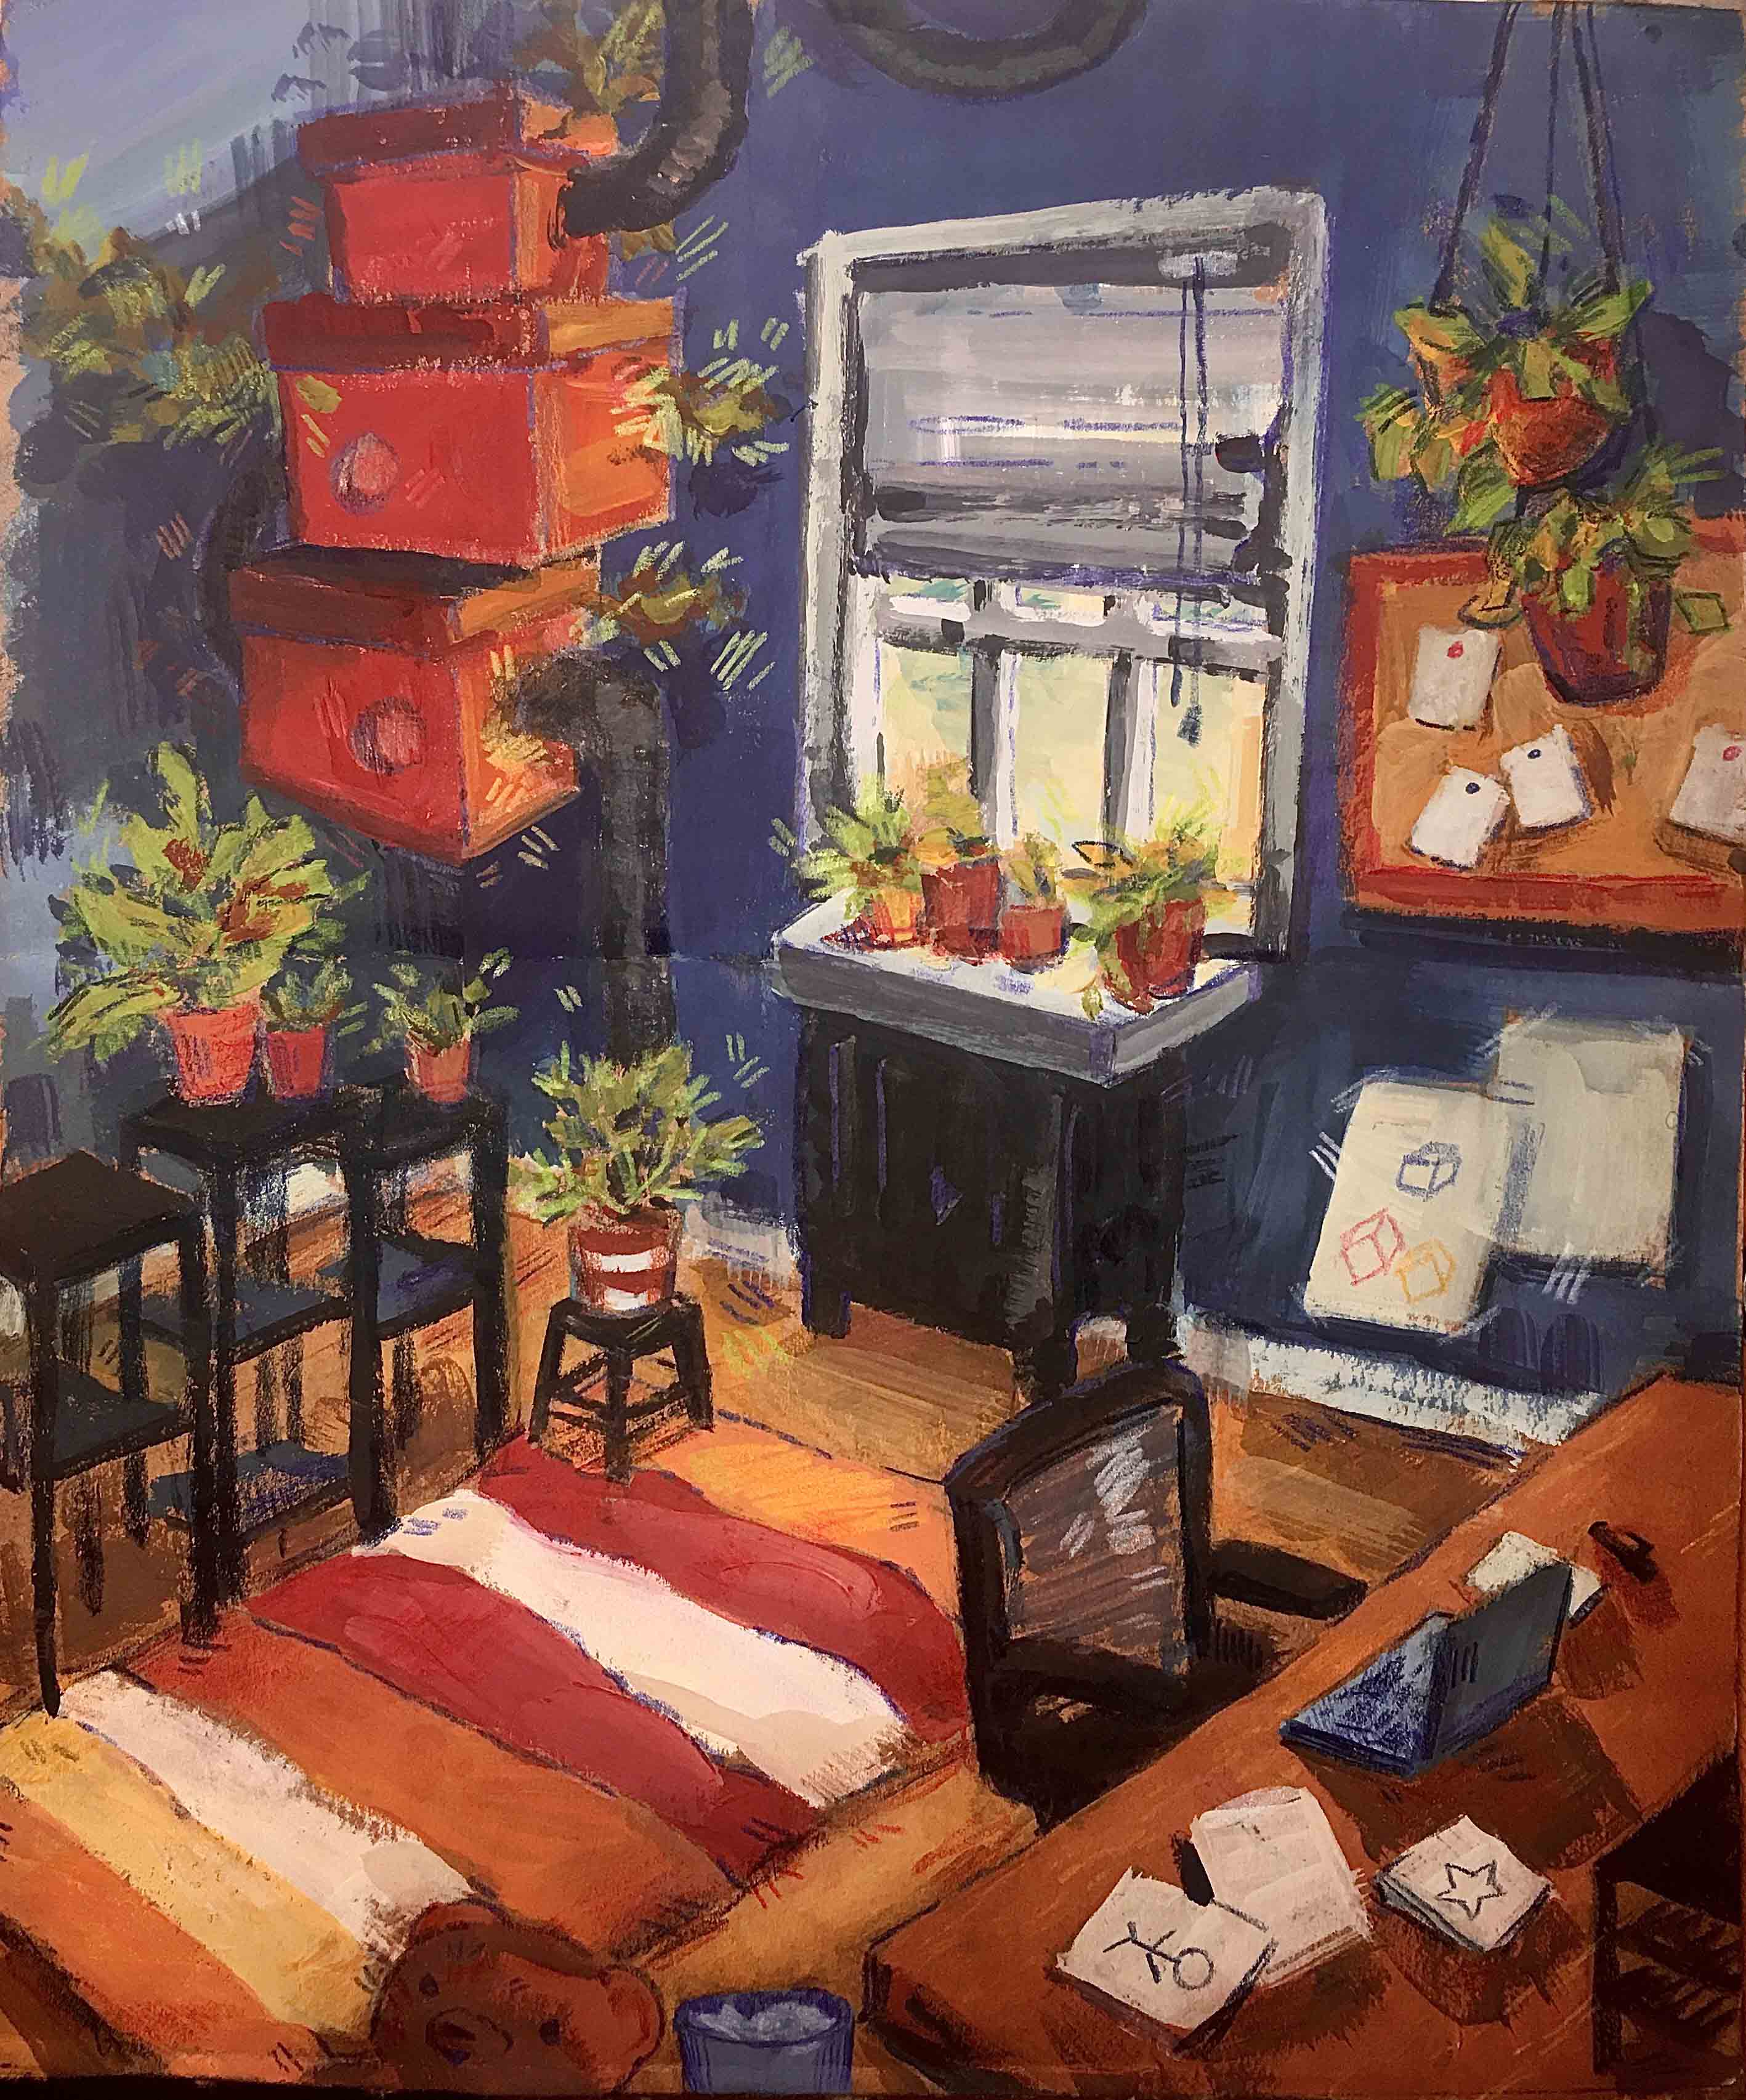 A painting of a home interior